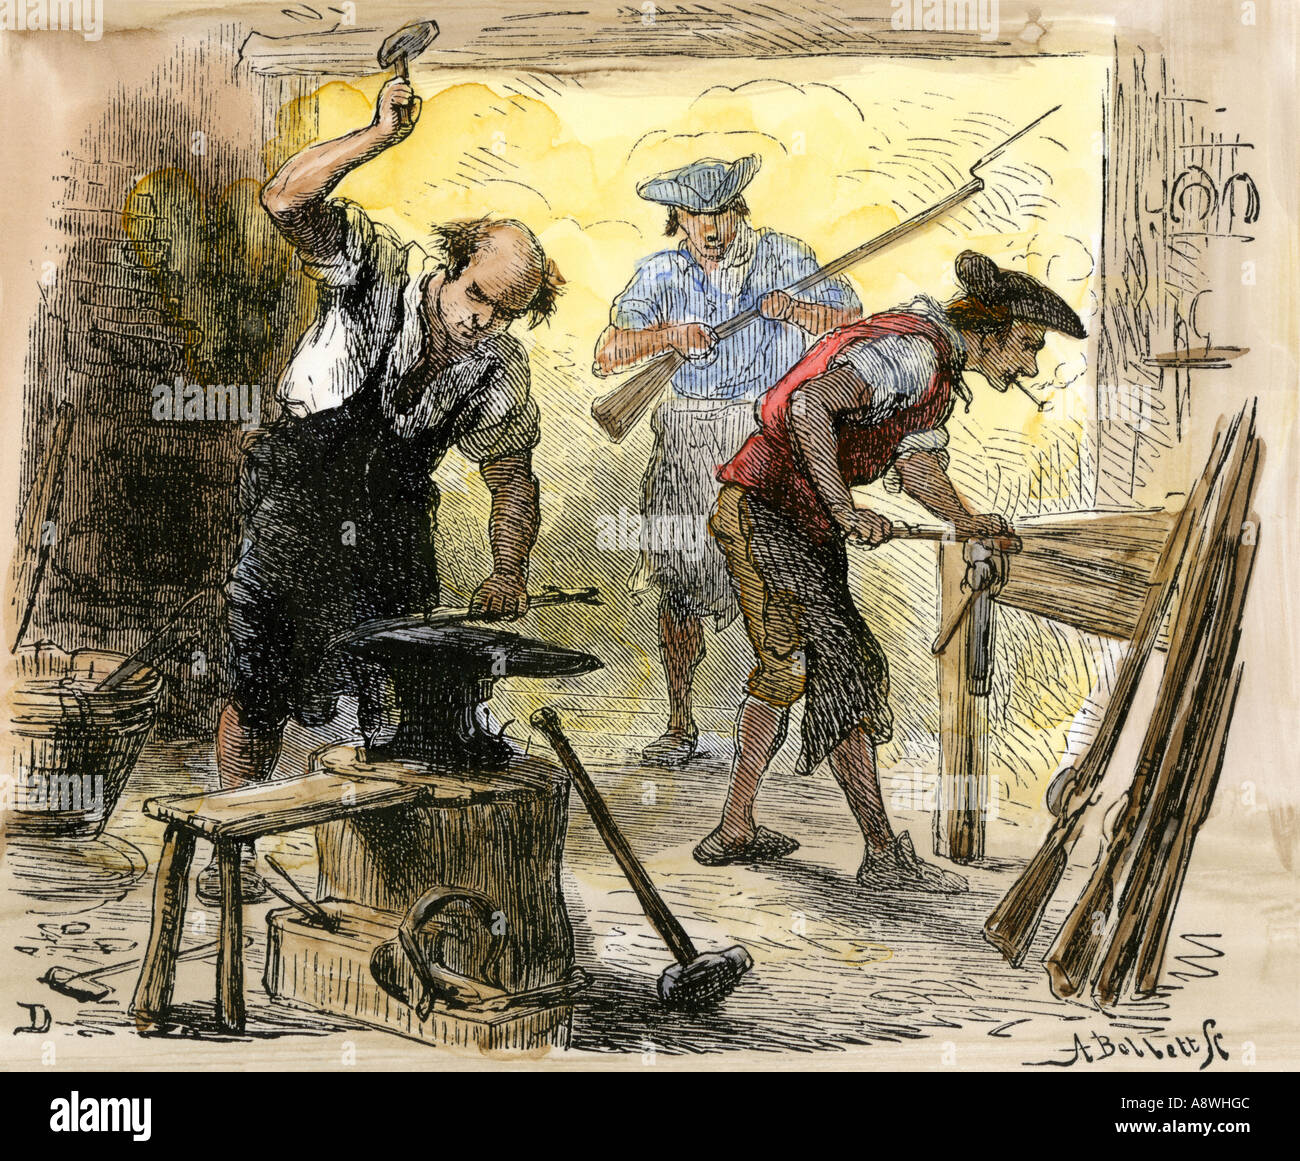 Gunsmiths forging muskets for the Minutemen before the American Revolution 1770s. Hand-colored woodcut of a Darley illustration Stock Photo